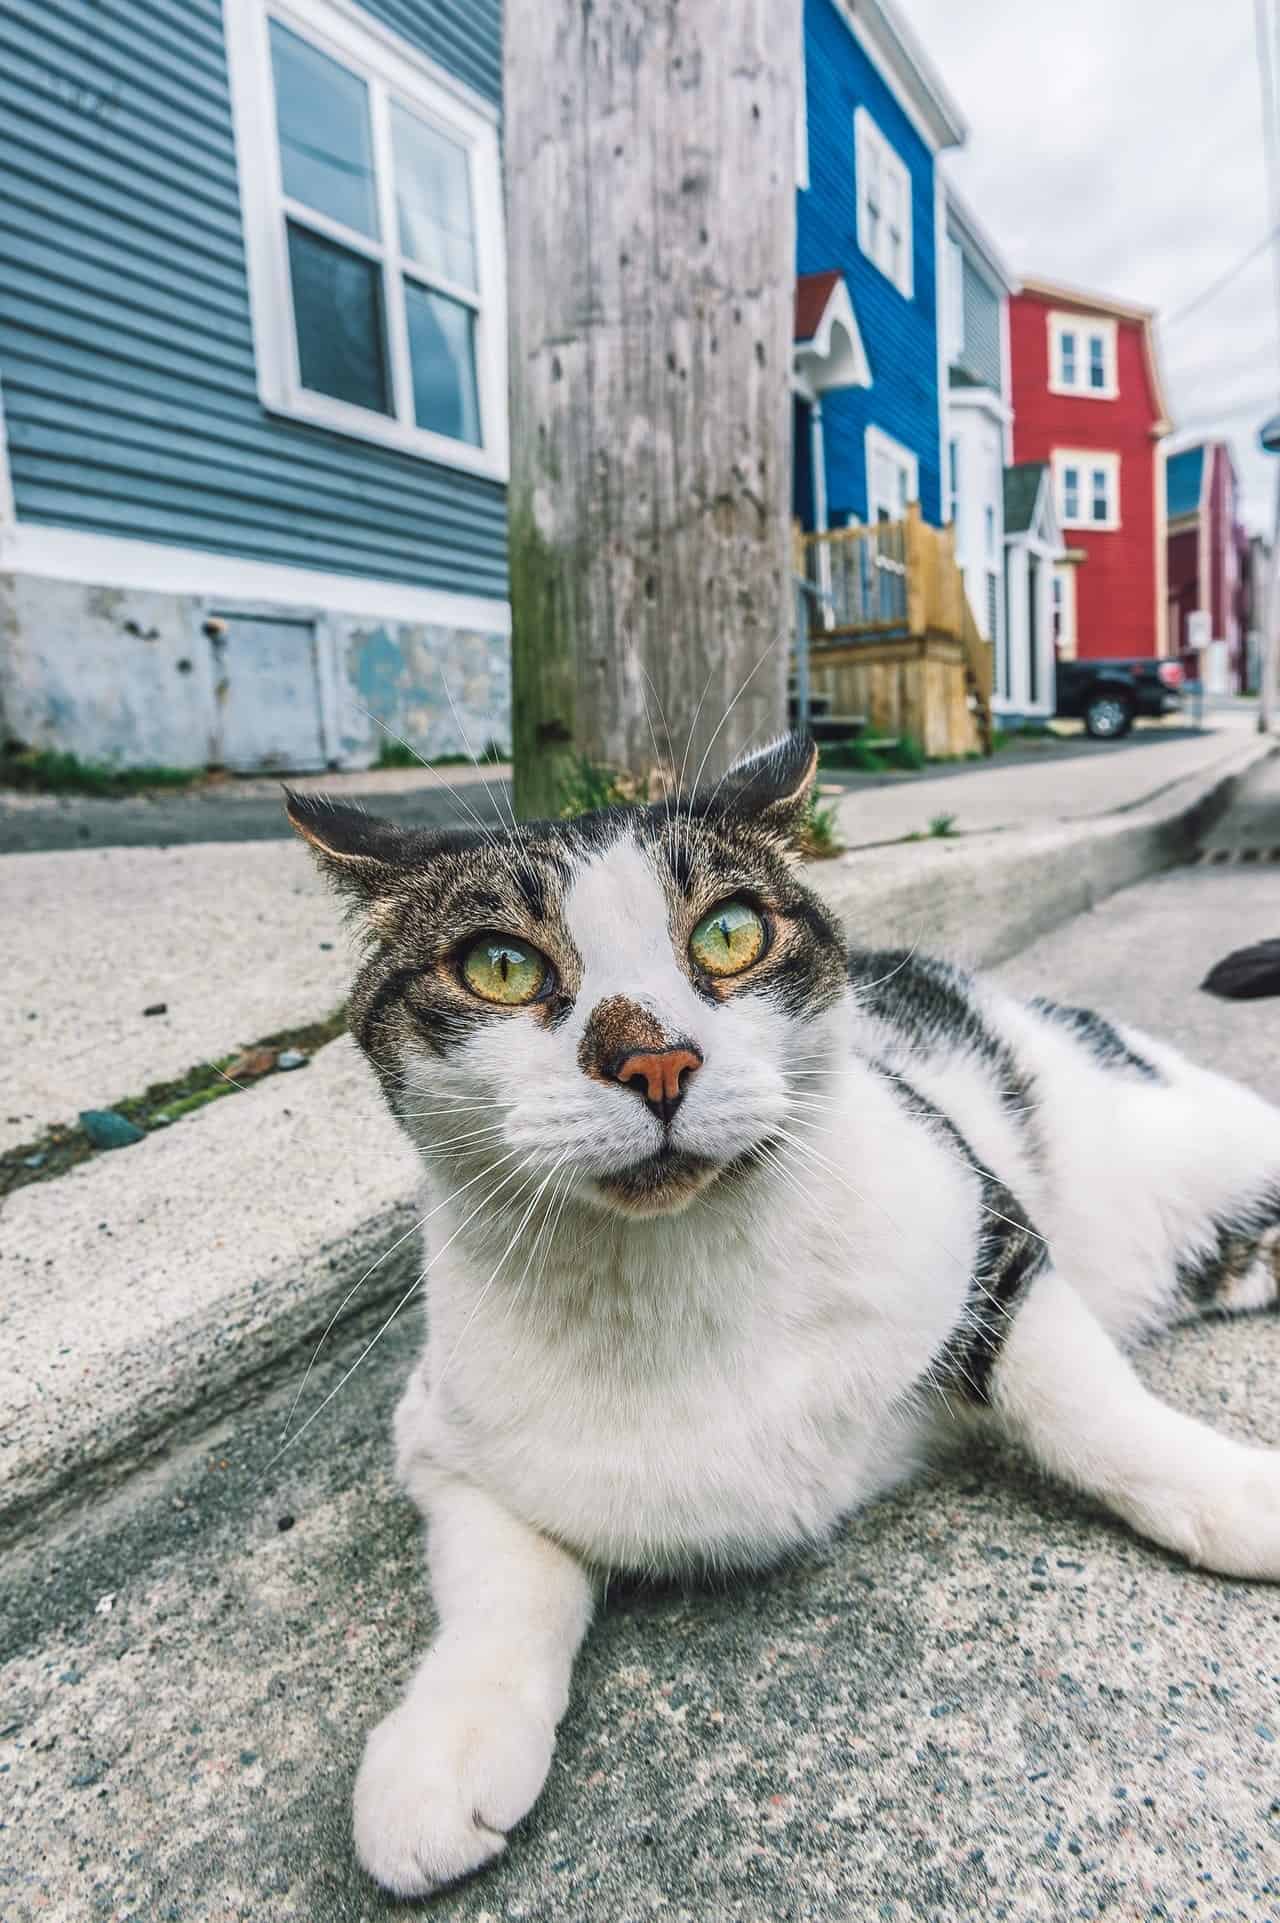 white cat with gray stripes laying on a concrete road in front of colorful houses